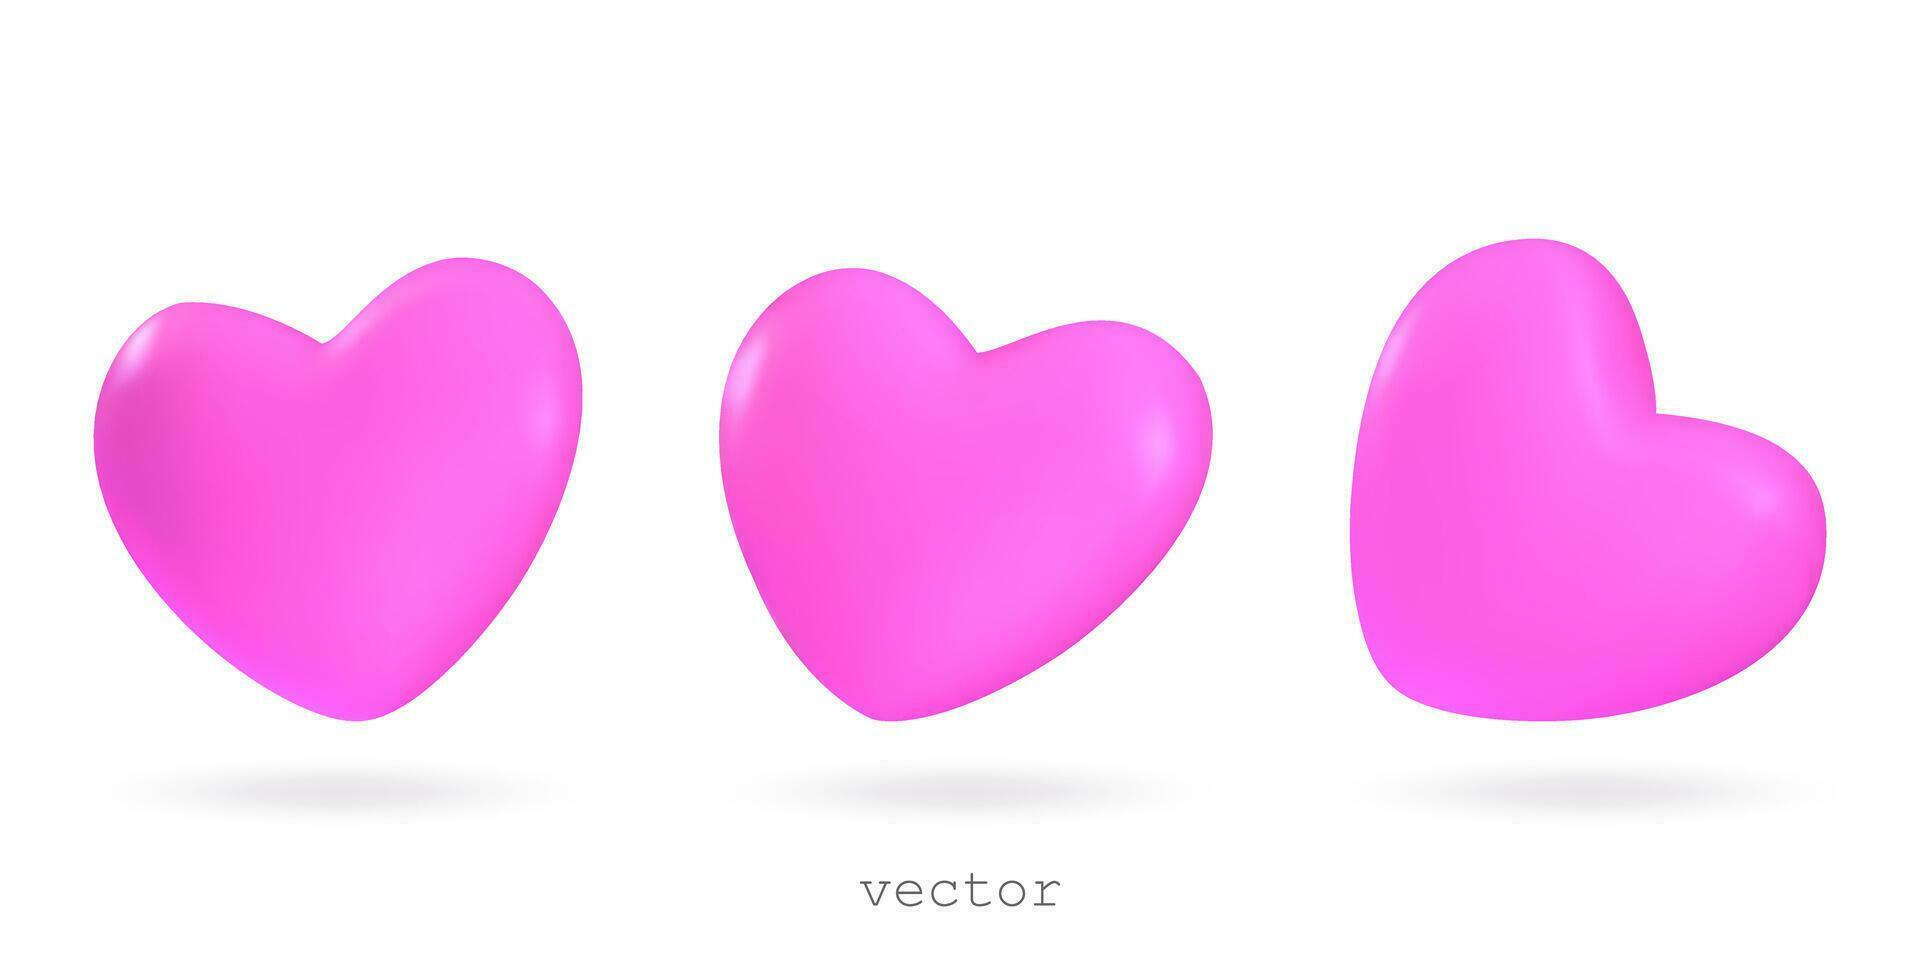 Set of vector 3d cartoon hearts. Flying pink hearts, symbol of love. Romantic decorative elements for Valentine's Day and Mother's Day design.Realistic vector illustration. 3d render isolated on white